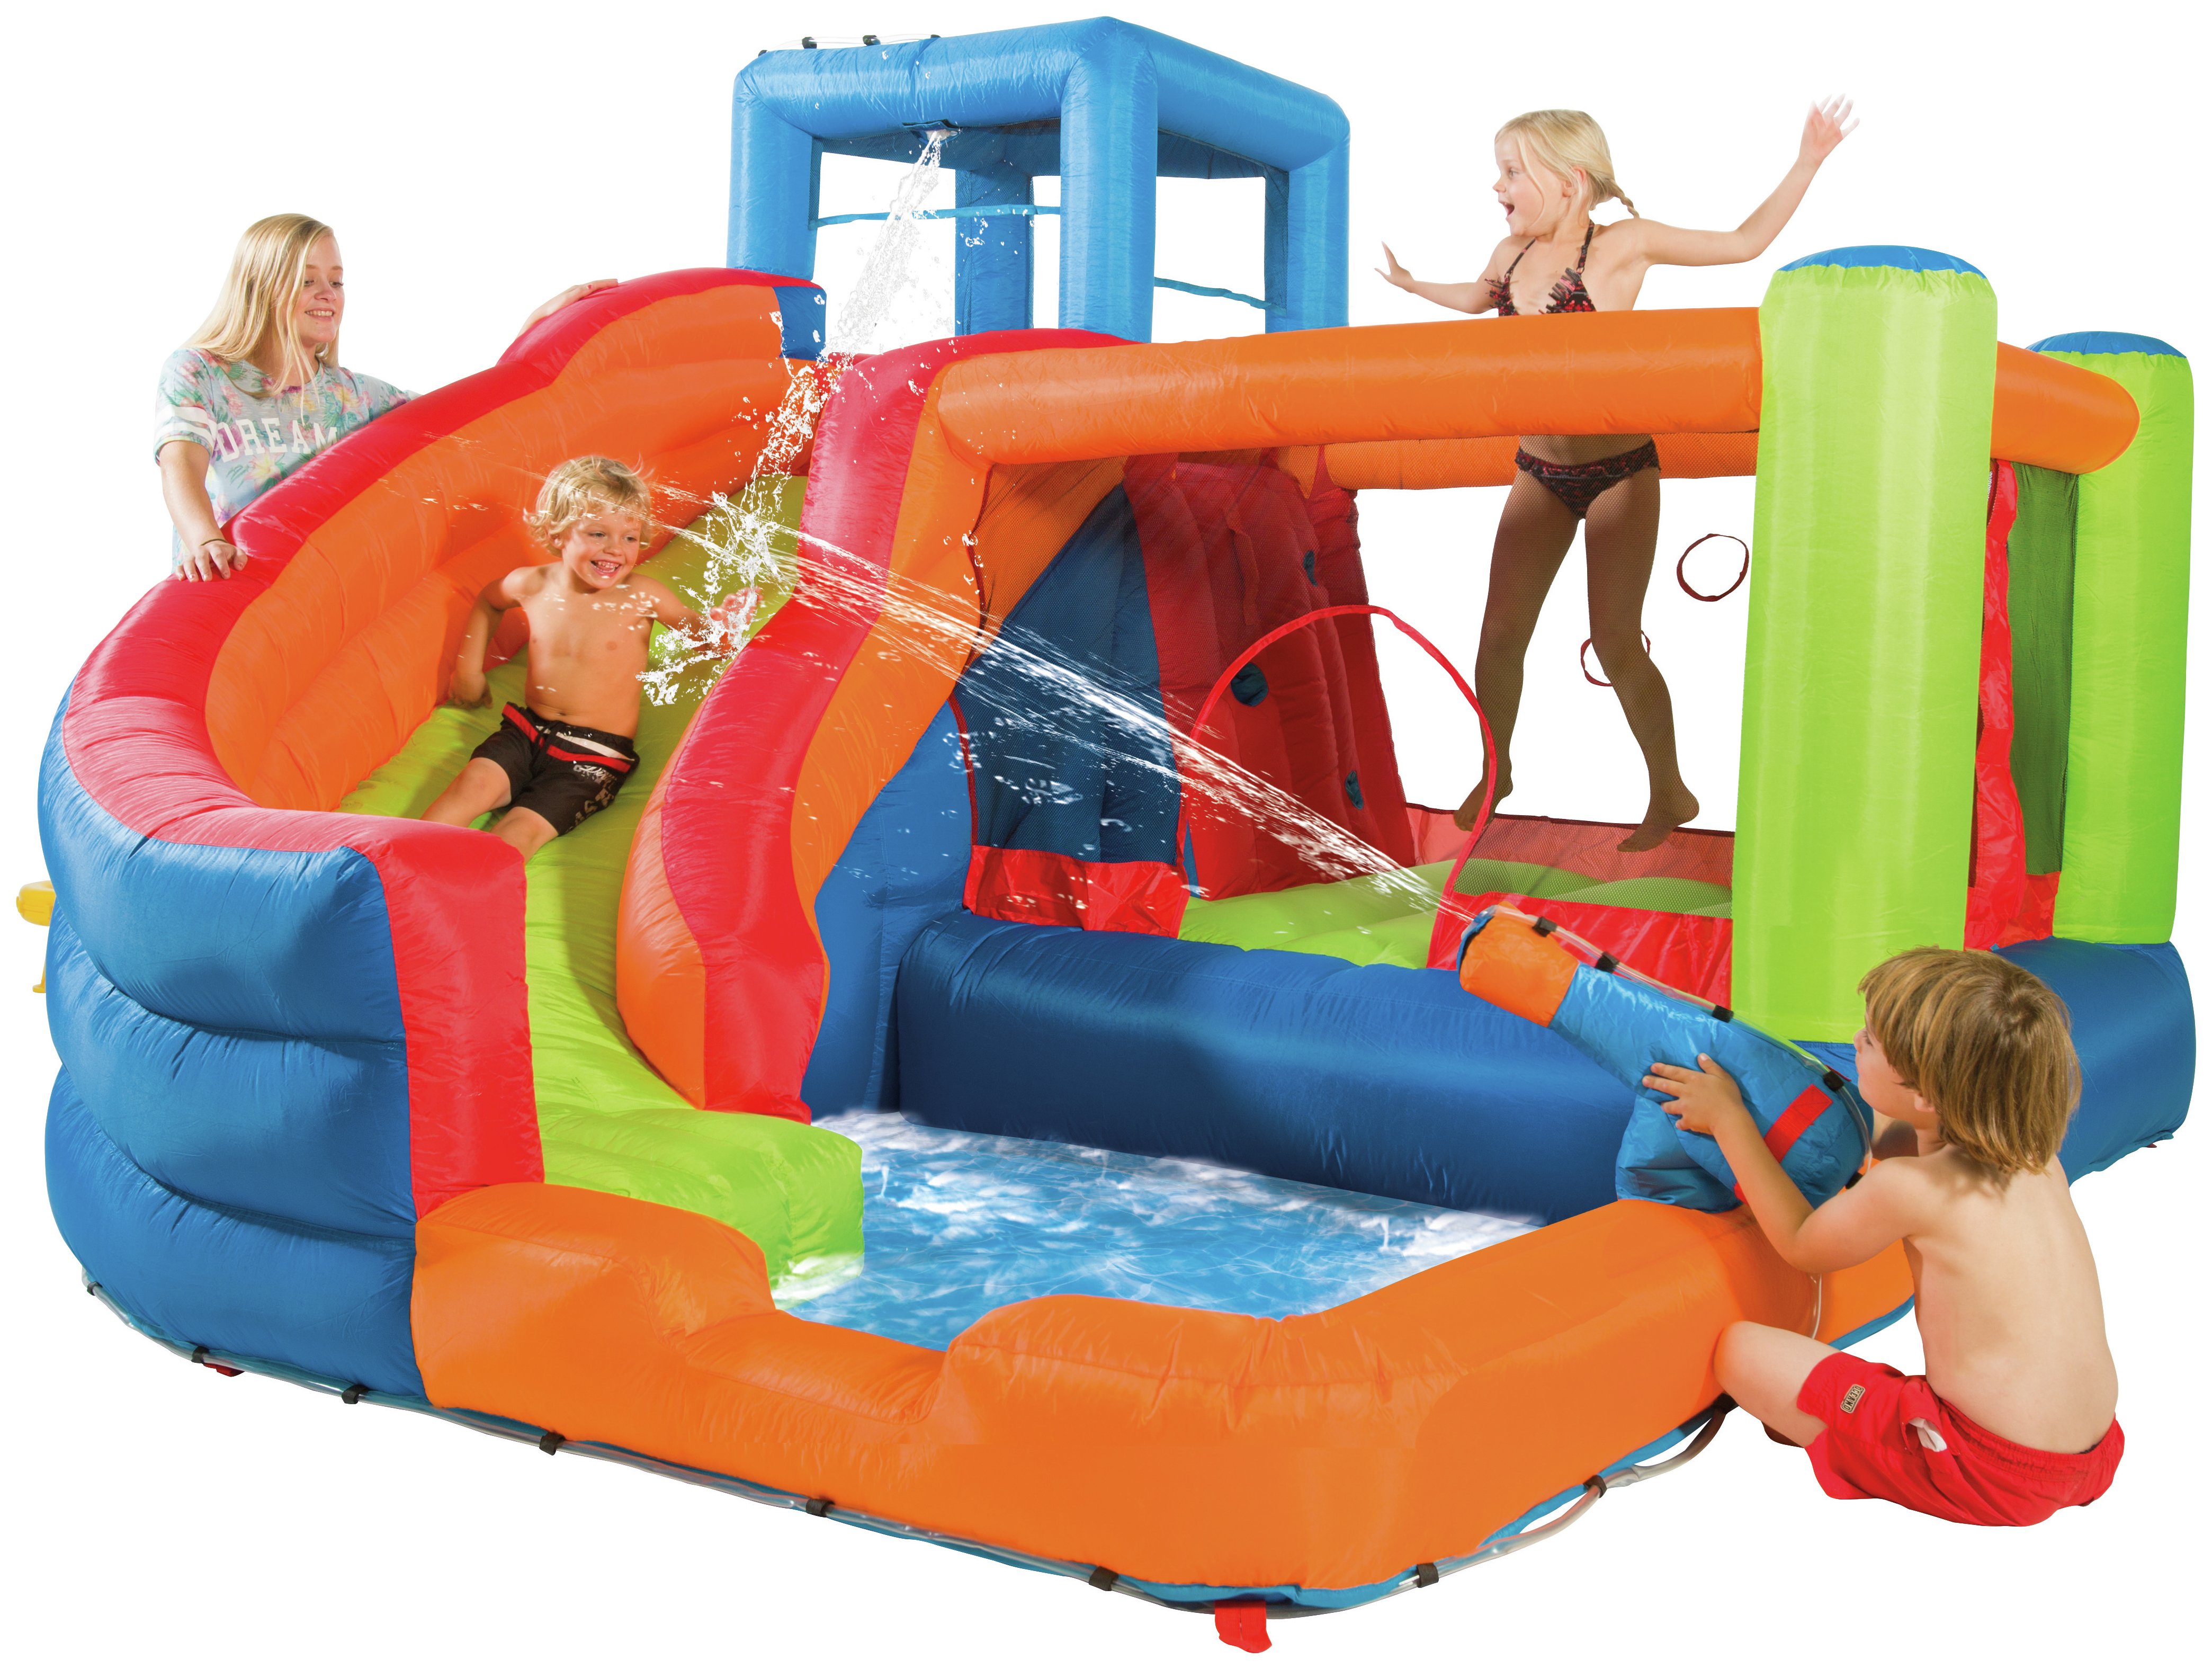 Plum - Bounce and Slide Review